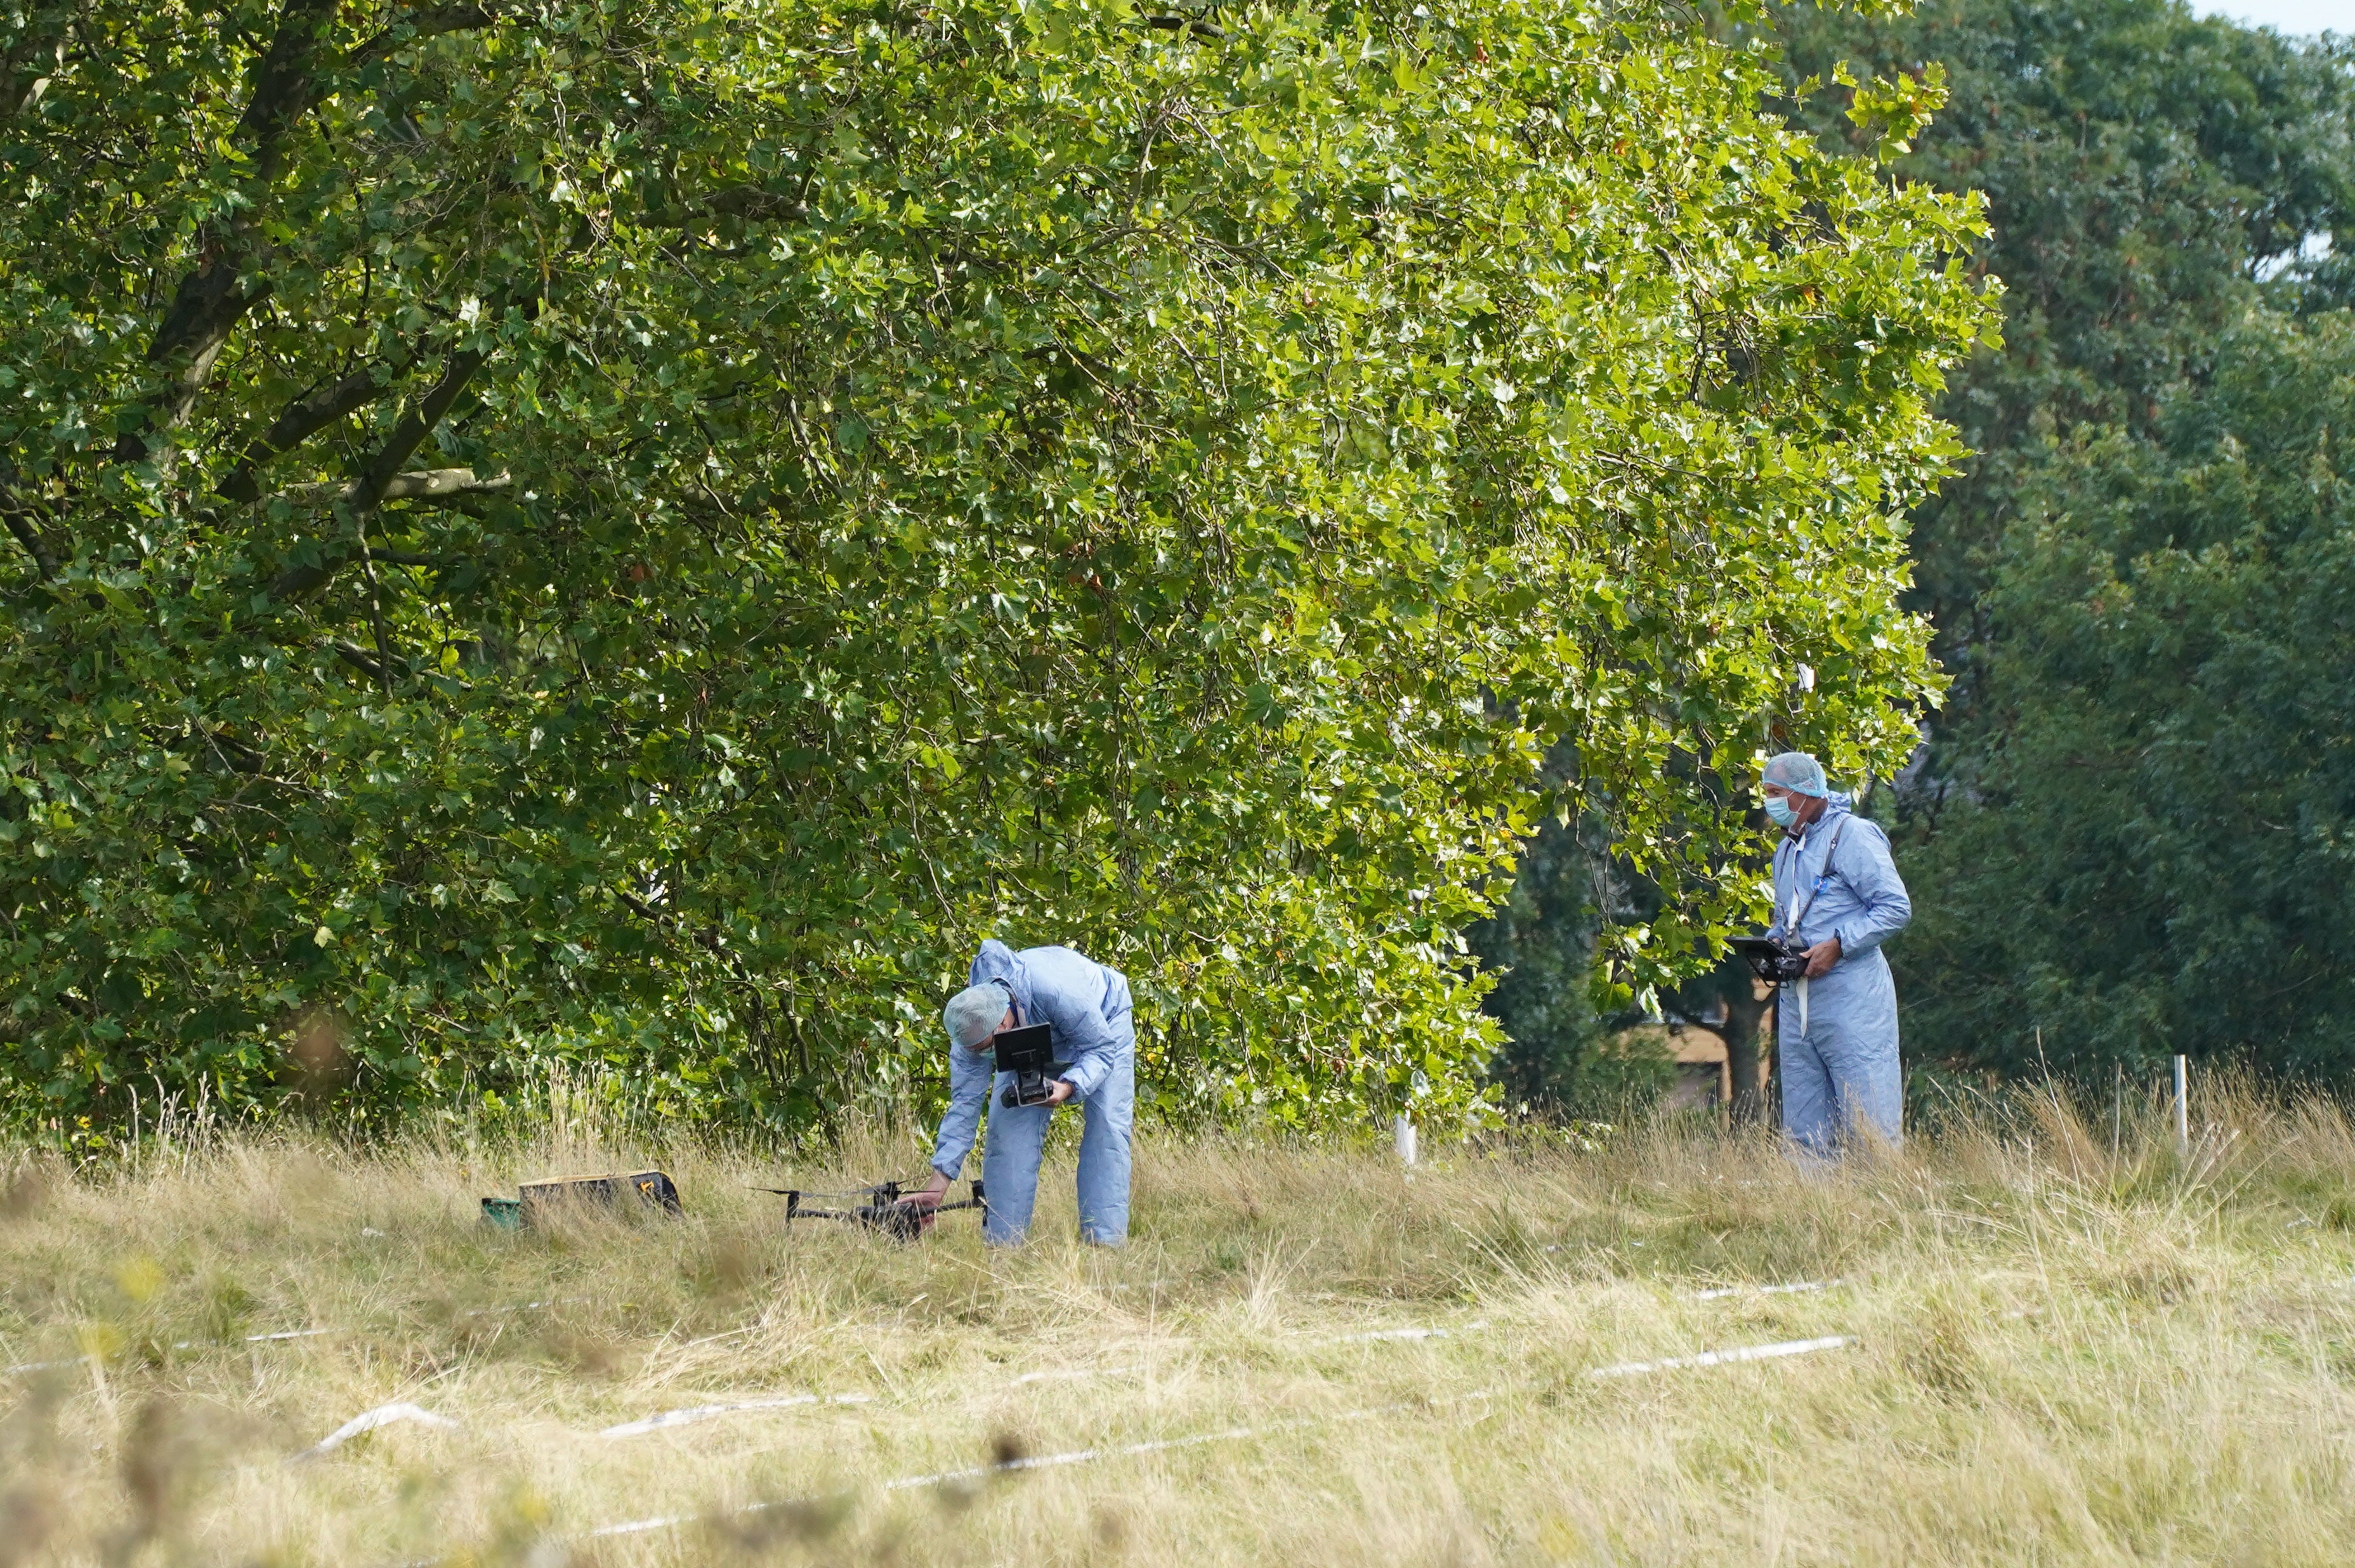 Forensic officers scour Cator Park in Kidbrooke, south-east London (Ian West/PA)